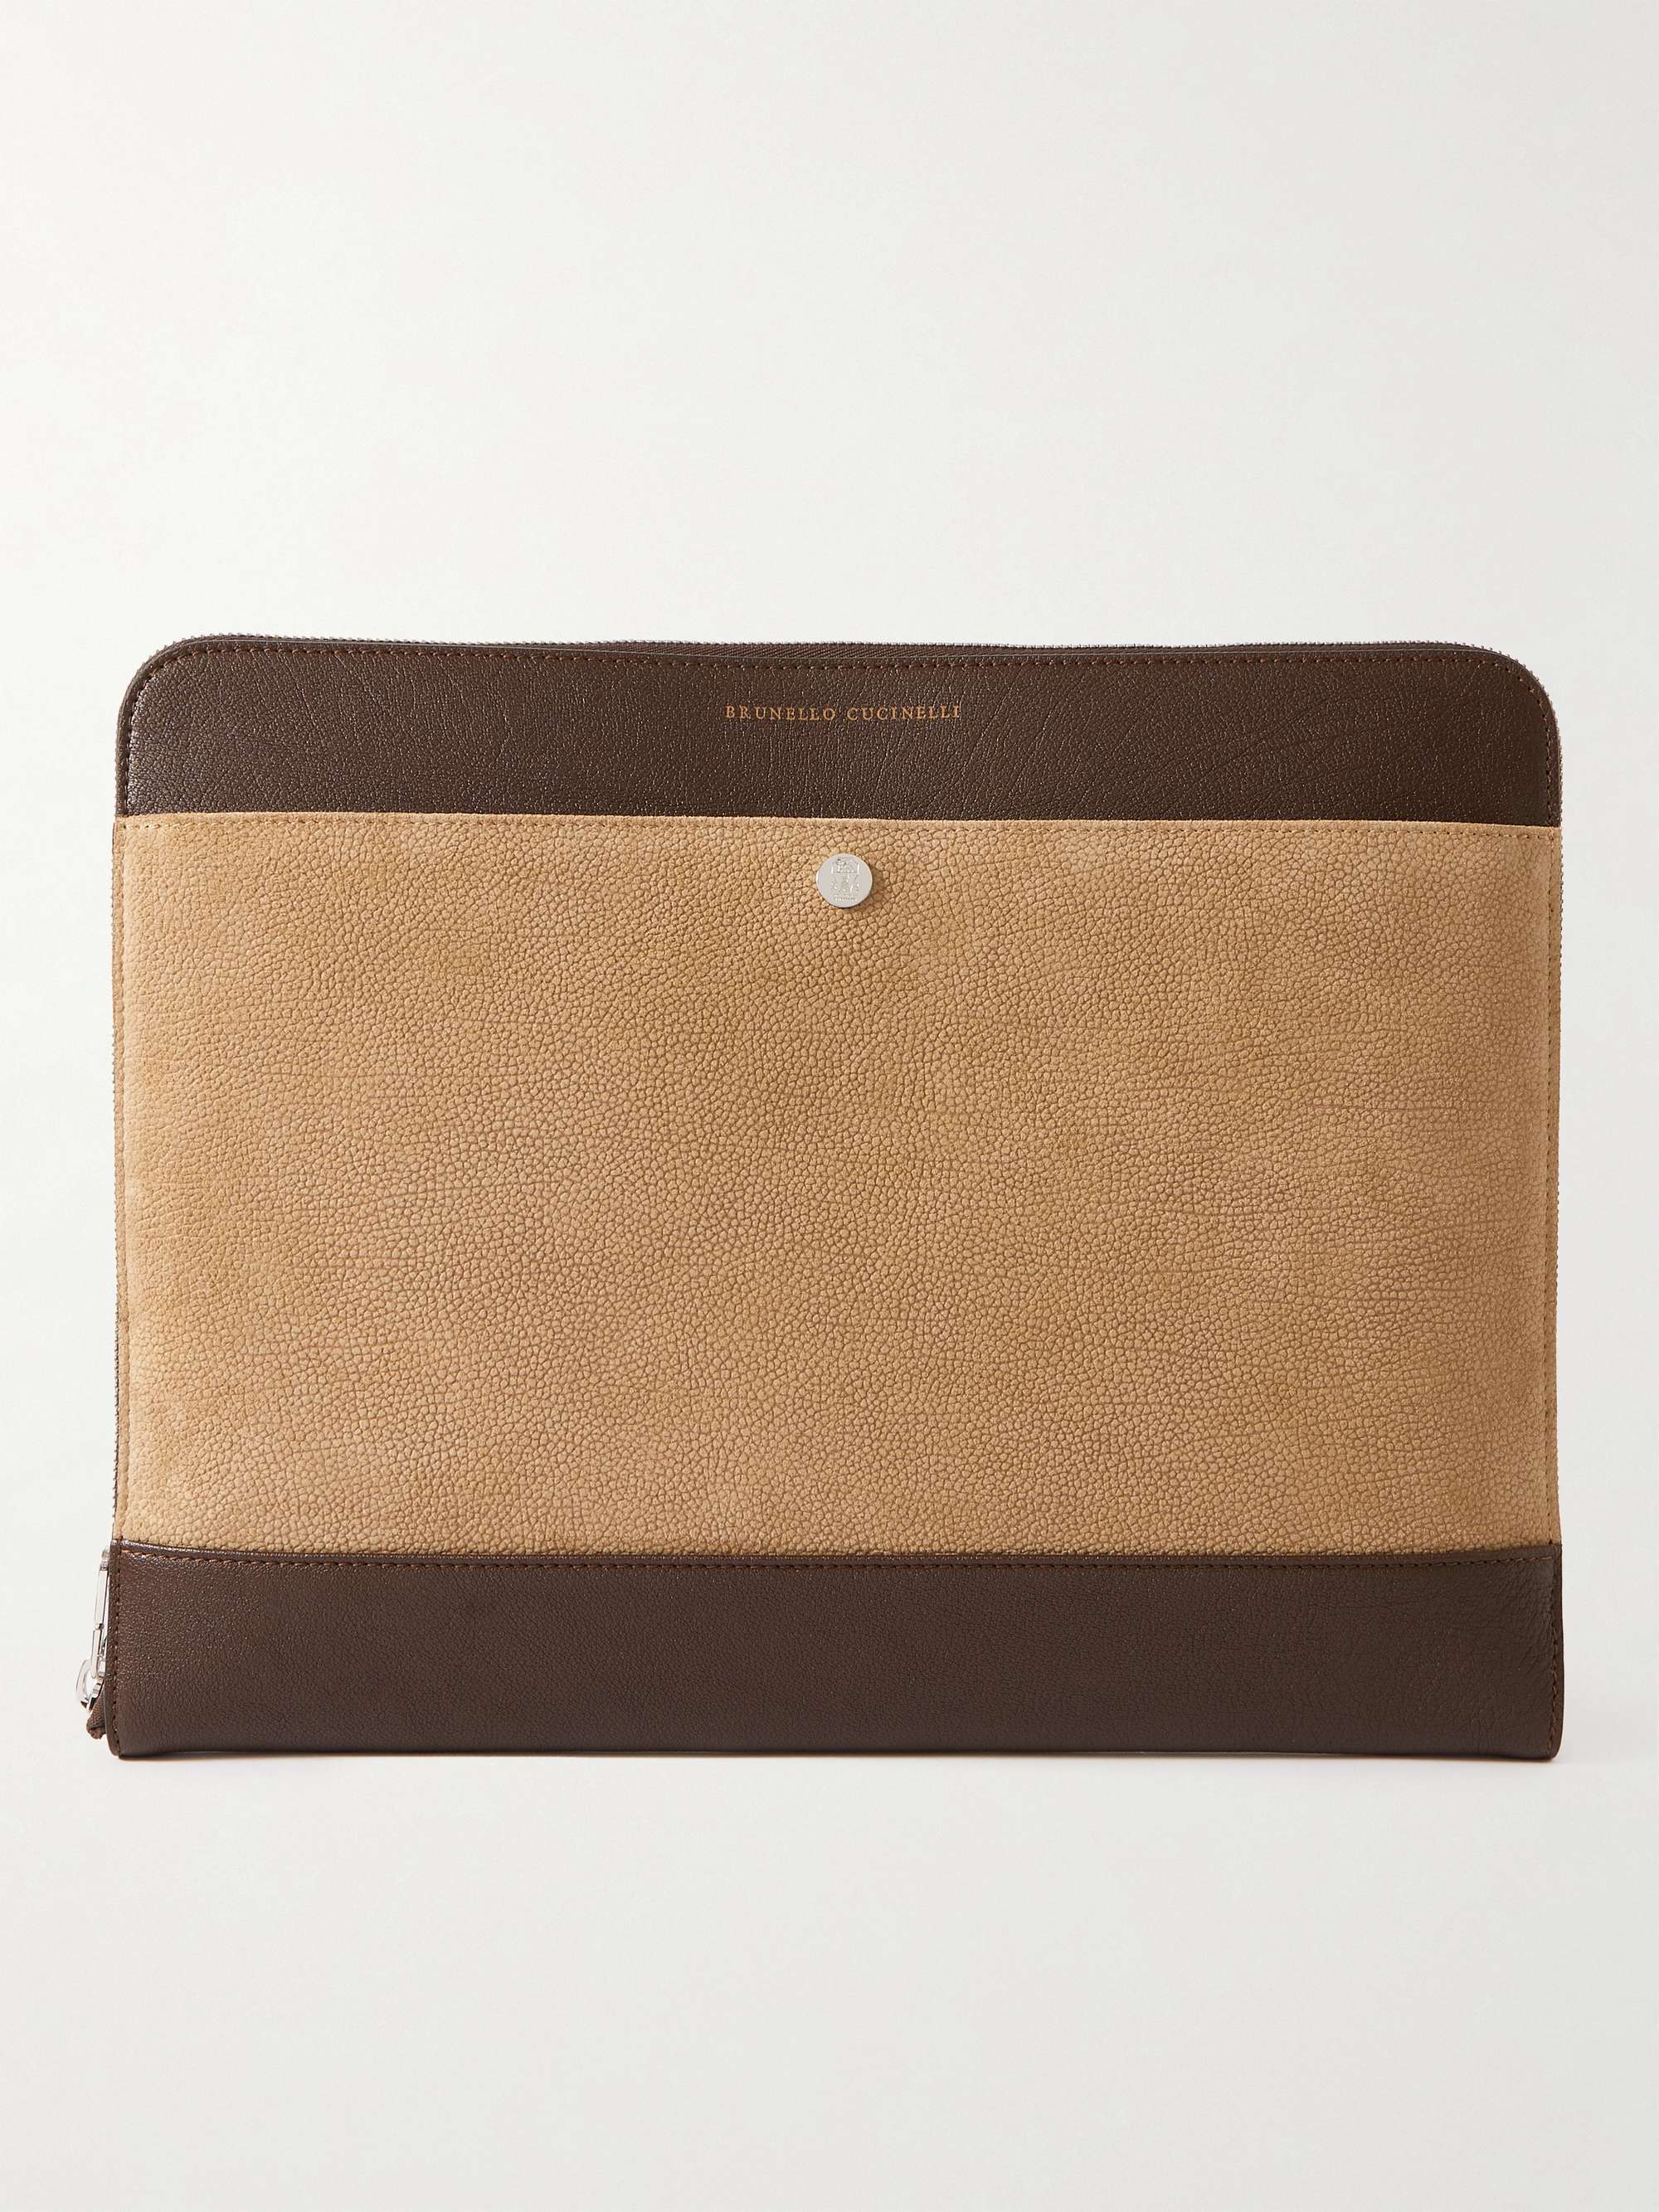 BRUNELLO CUCINELLI Leather-Trimmed Suede Pouch